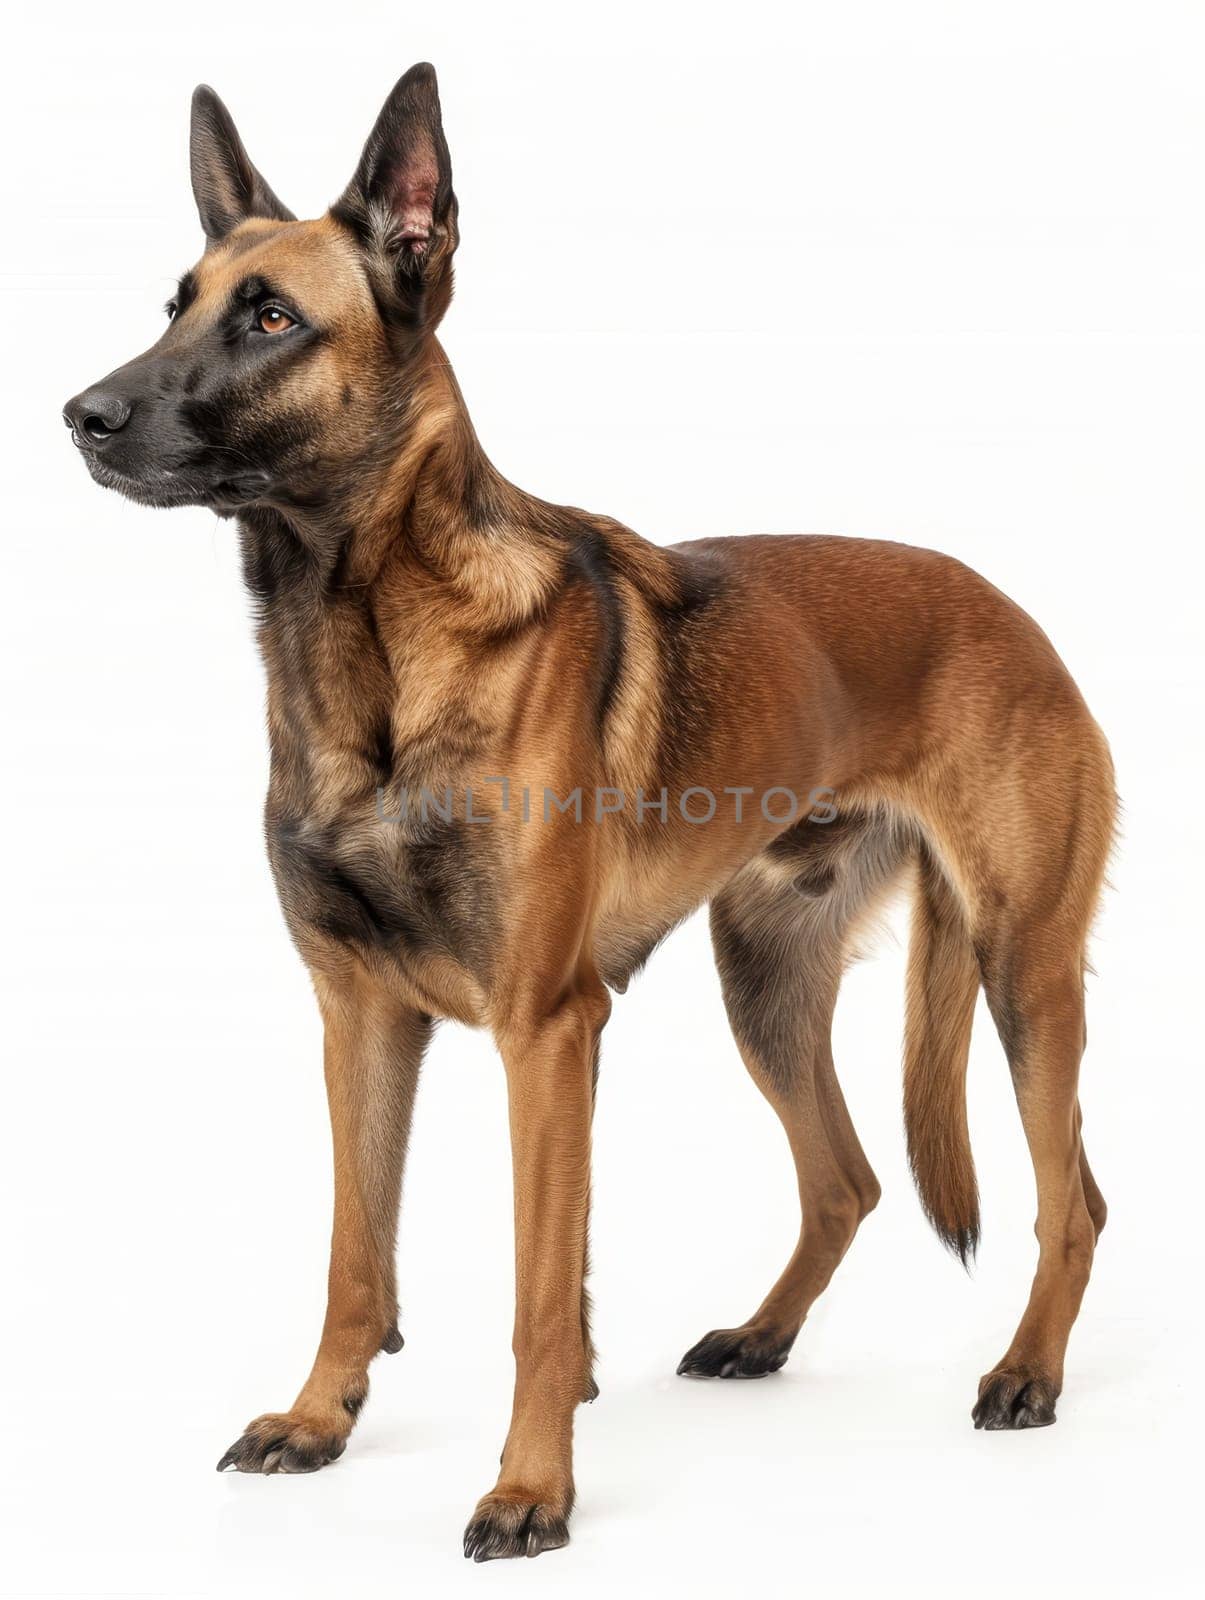 A Belgian Malinois stands alert on a white background, its head turned to the side, showcasing the breed's poised and vigilant nature.